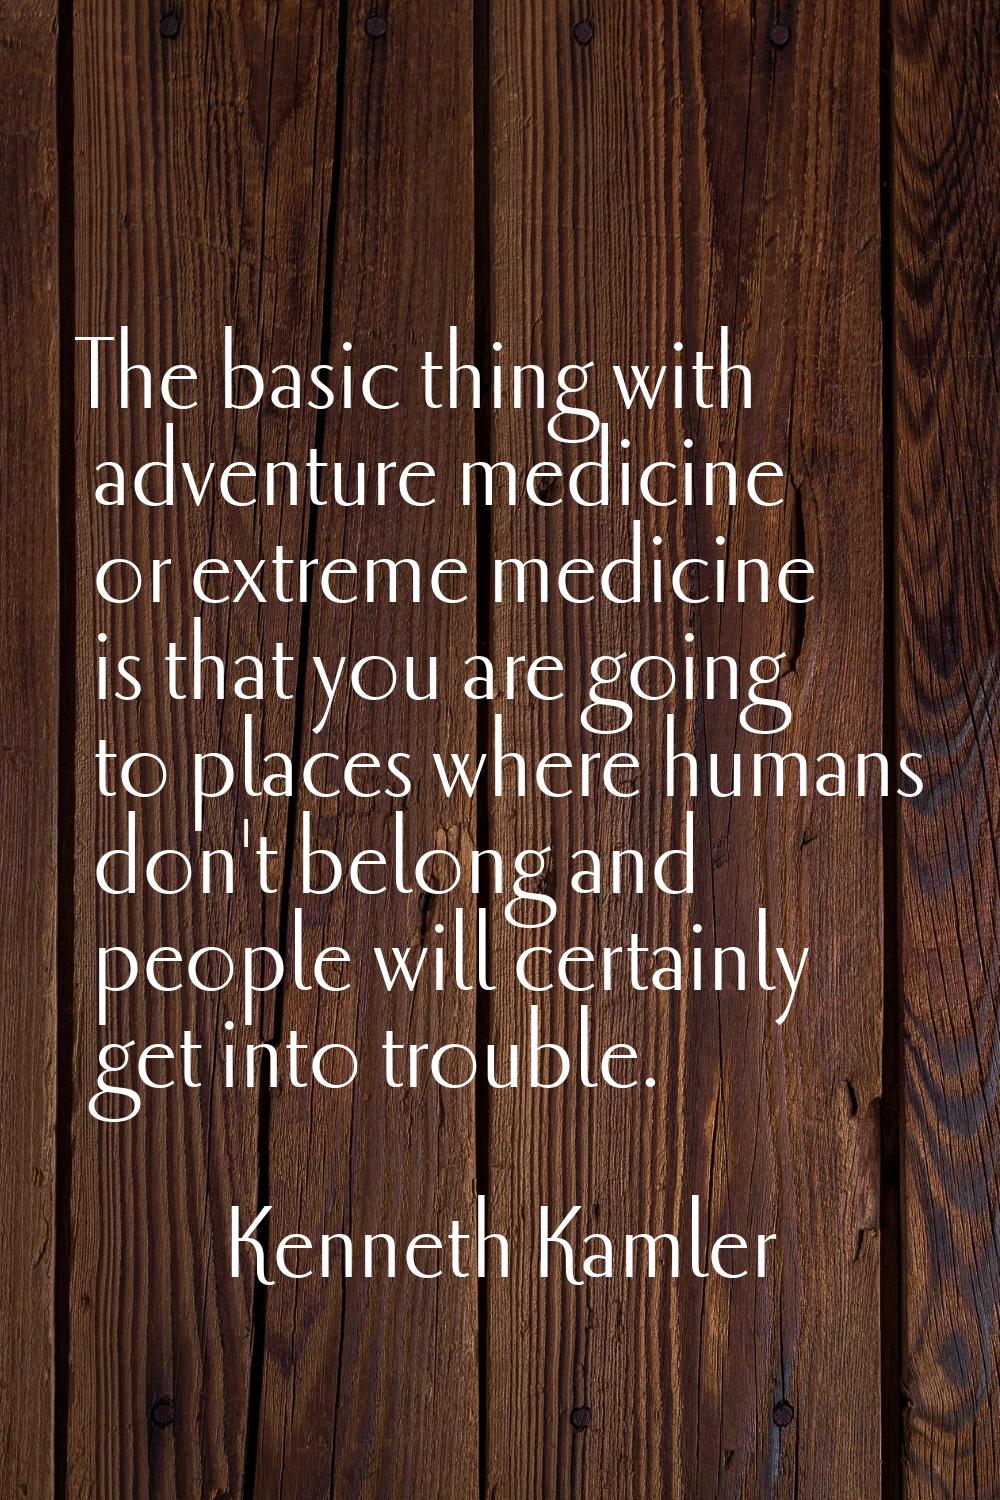 The basic thing with adventure medicine or extreme medicine is that you are going to places where h